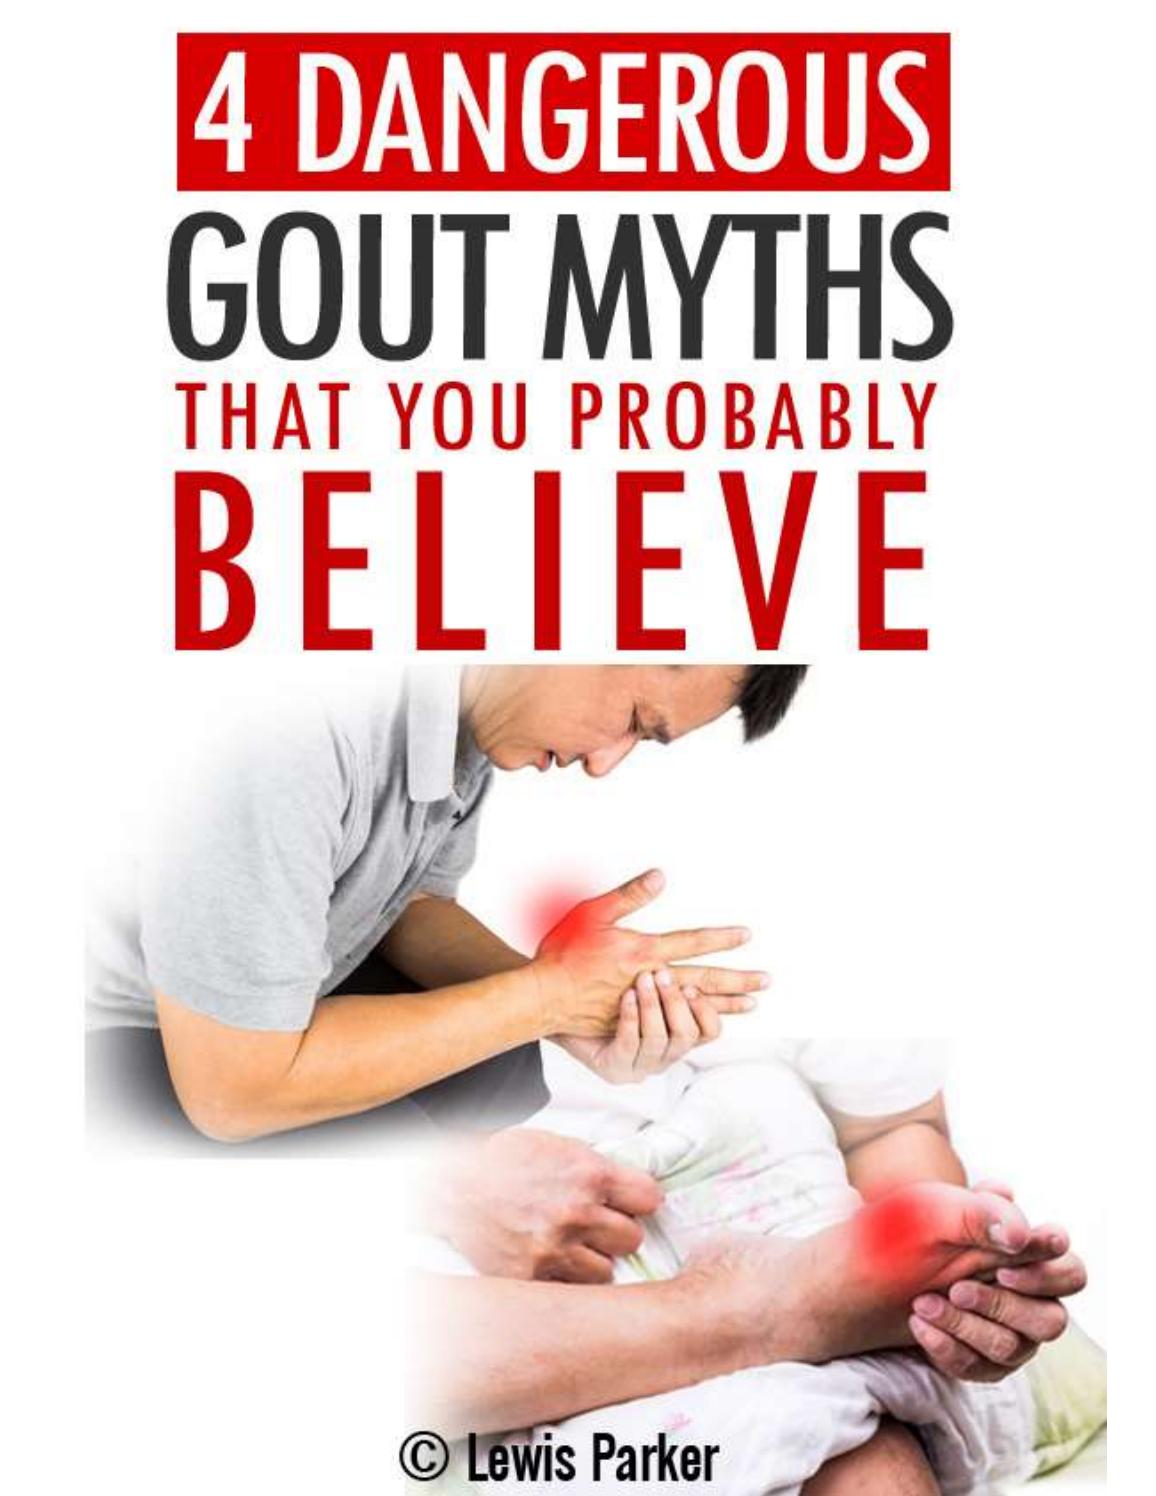 Gout myths report by extreme health